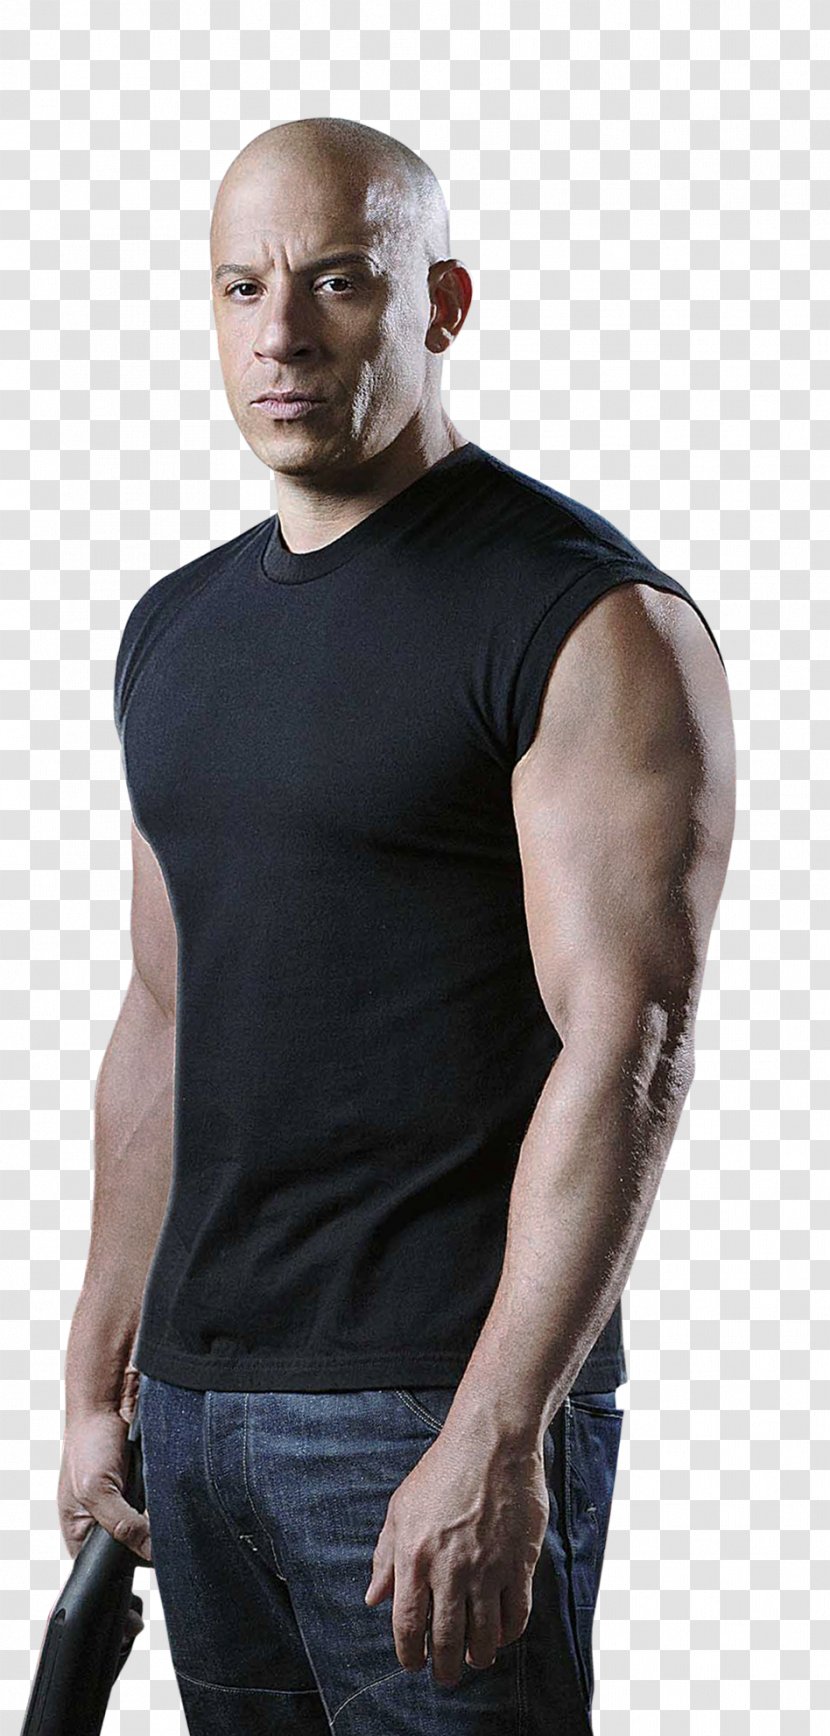 Vin Diesel The Fast And Furious Dominic Toretto Luke Hobbs - Shoulder Transparent PNG